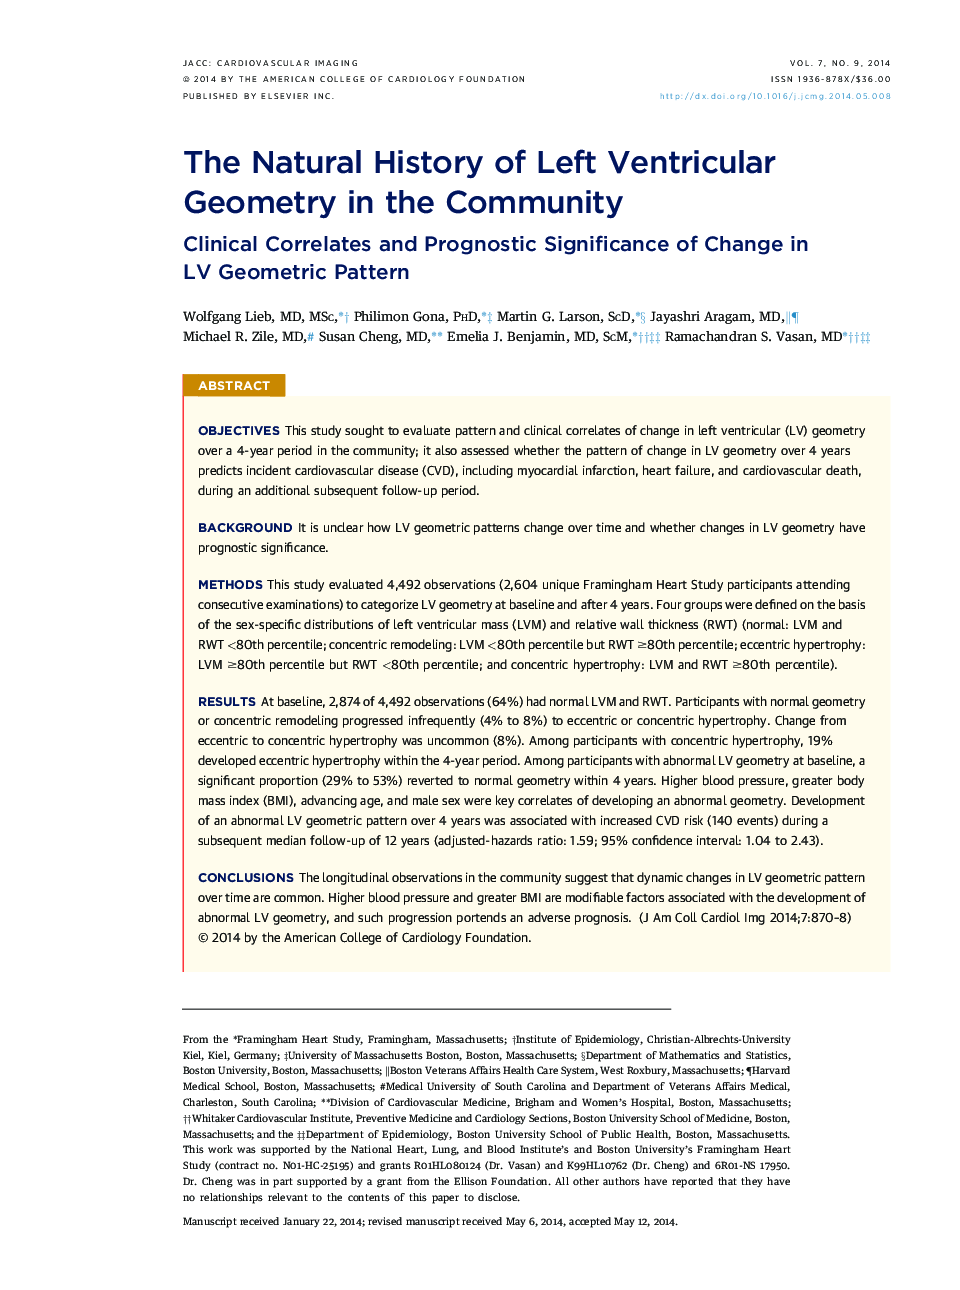 The Natural History of Left Ventricular Geometry in the Community: Clinical Correlates and Prognostic Significance of Change in LVÂ Geometric Pattern